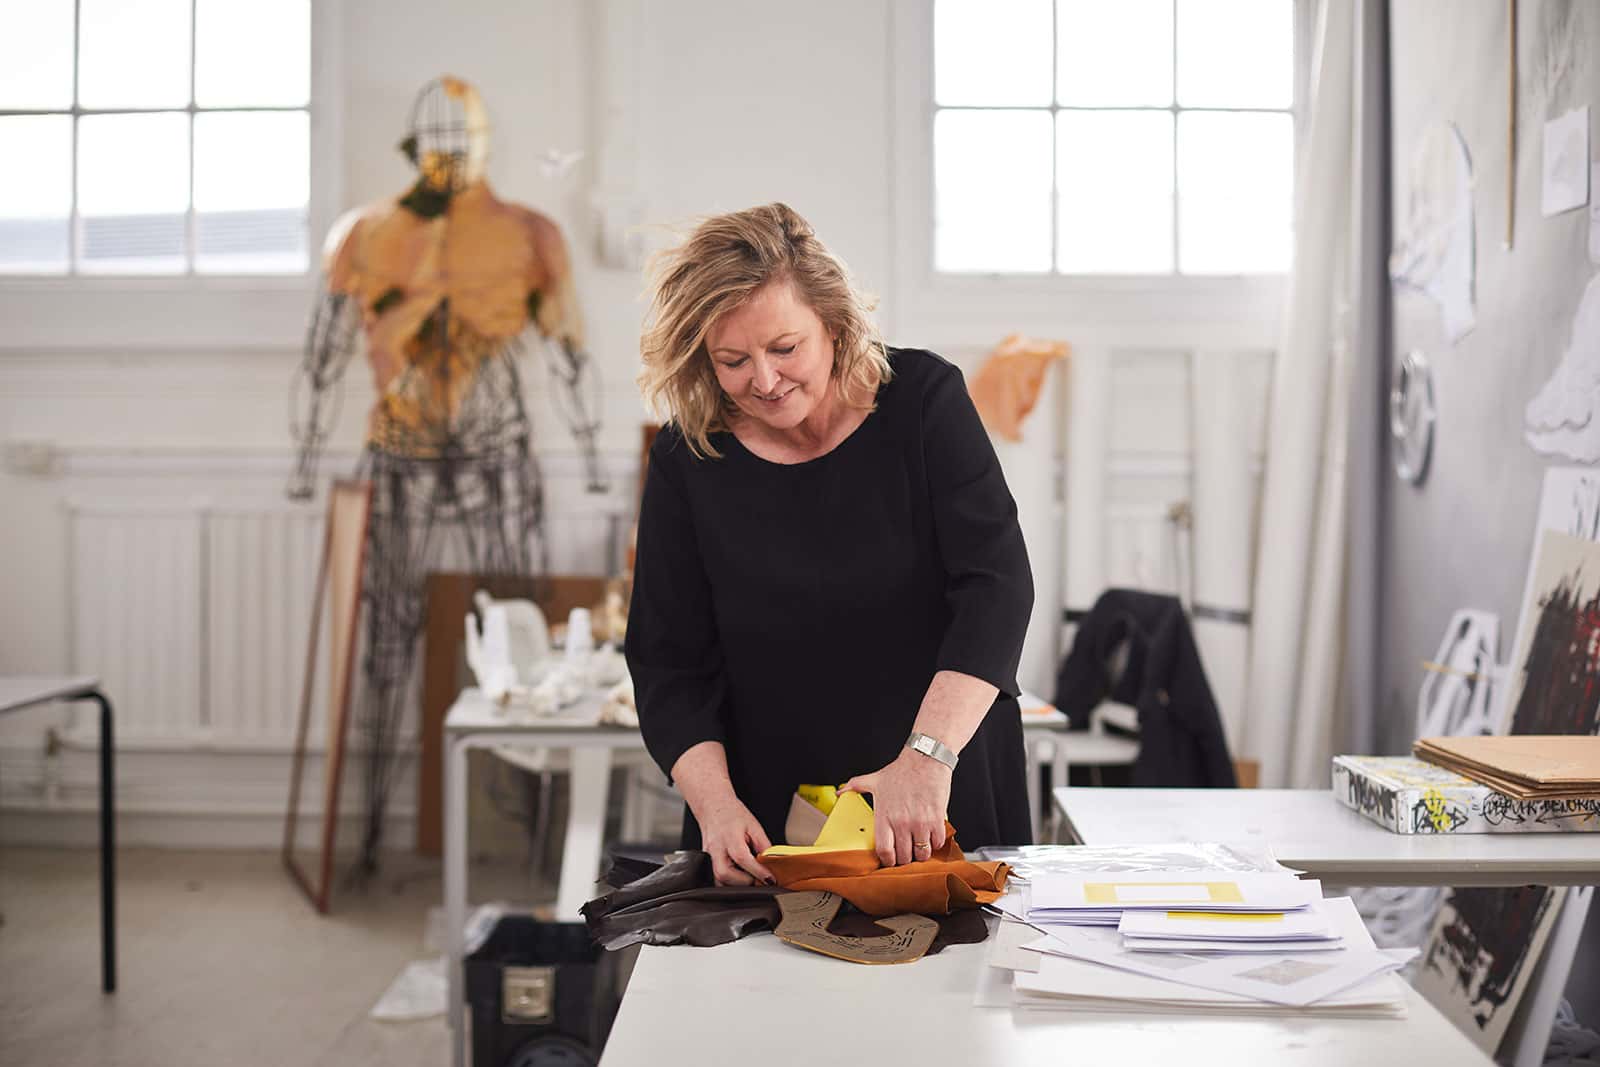 Marie Brennan works on her shoemaking business in the NUA MA Fine Art studio in front of art